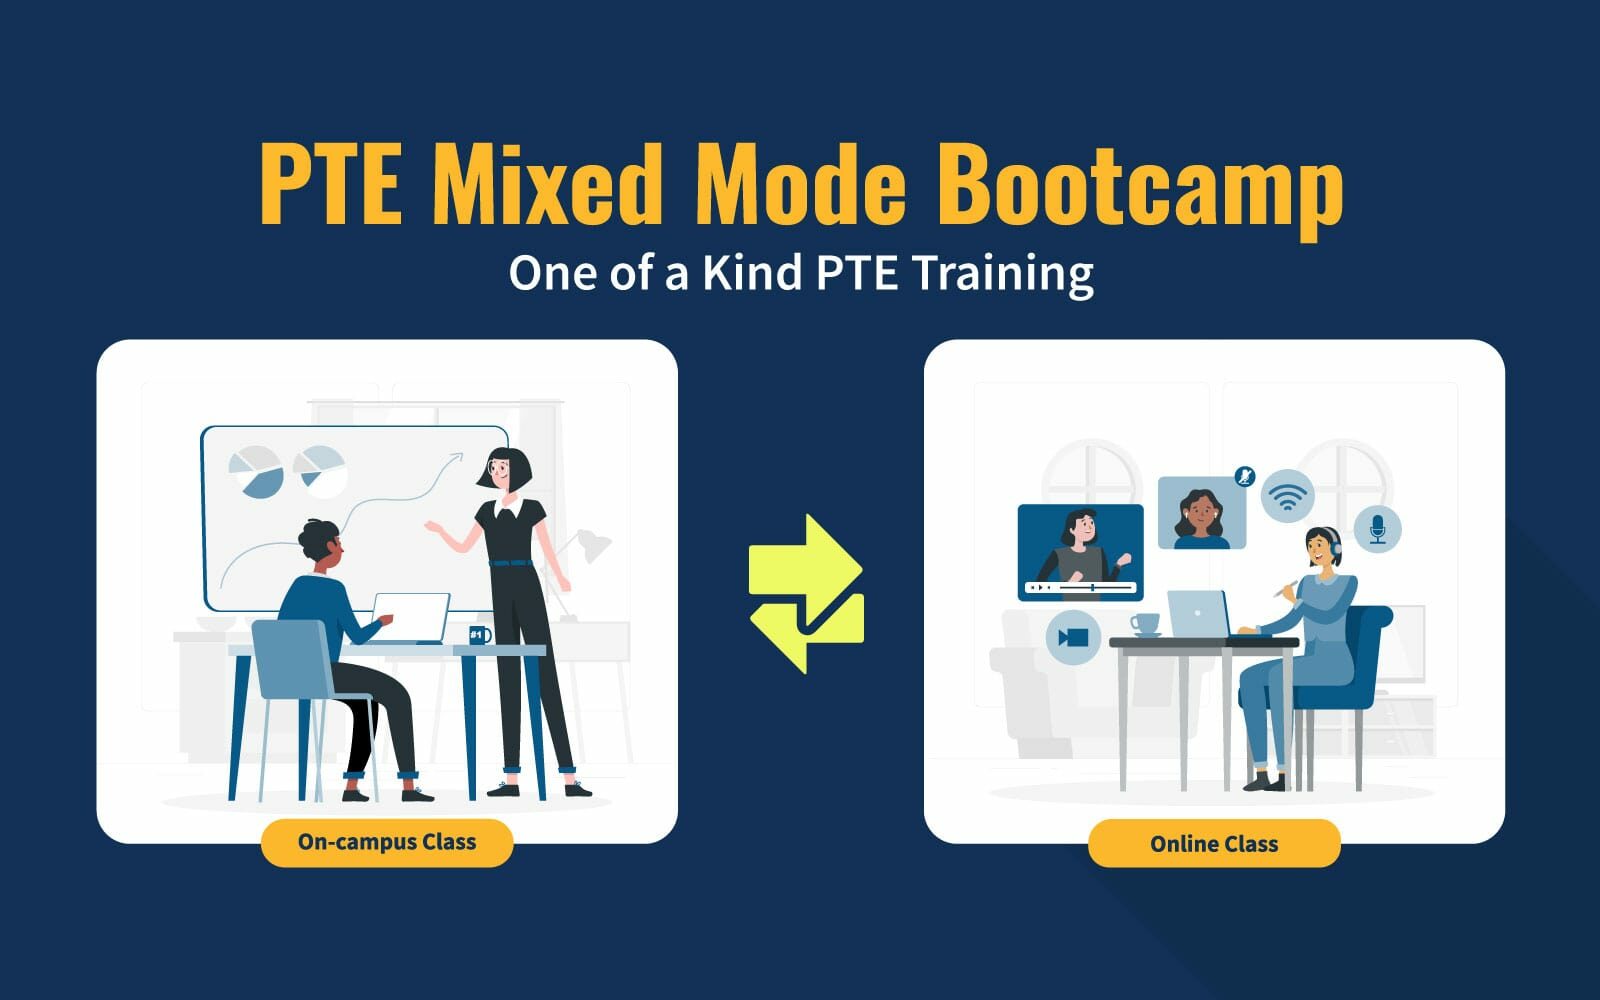 PTE Mixed Mode Bootcamp